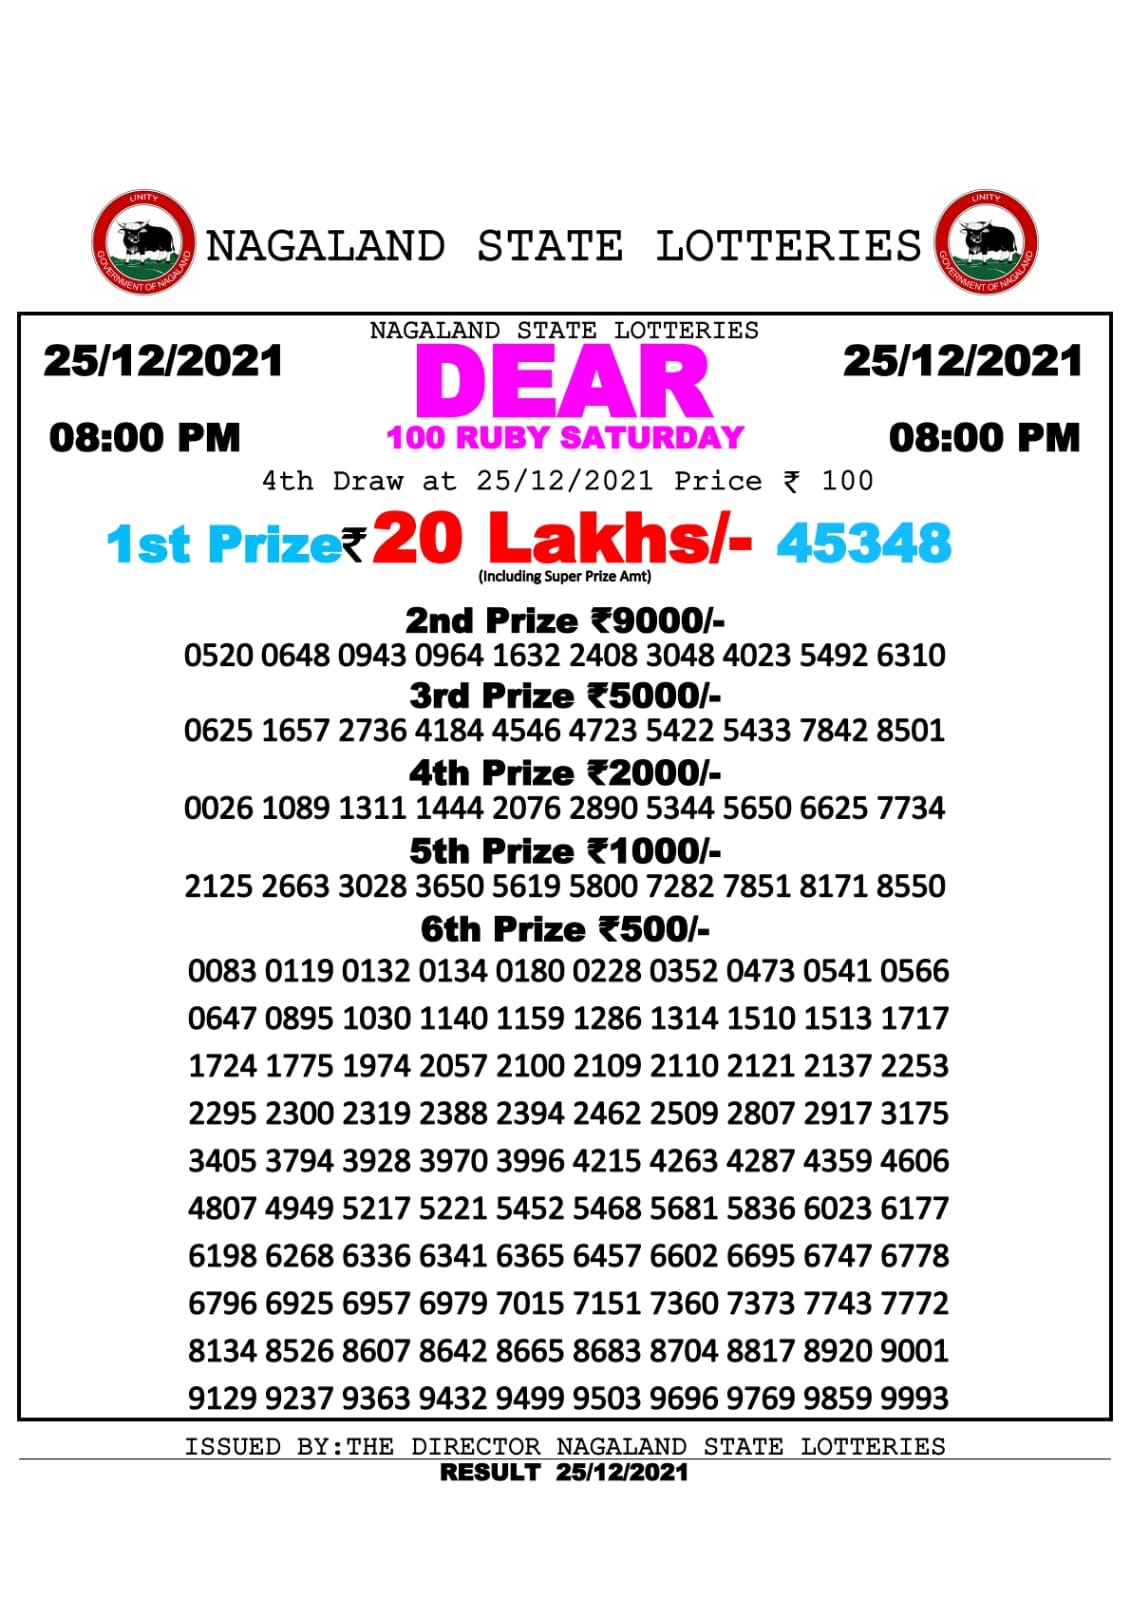 NAGALLAND STATE DEAR 100 WEEKLY LOTTERY 8 pm 25.12.2021